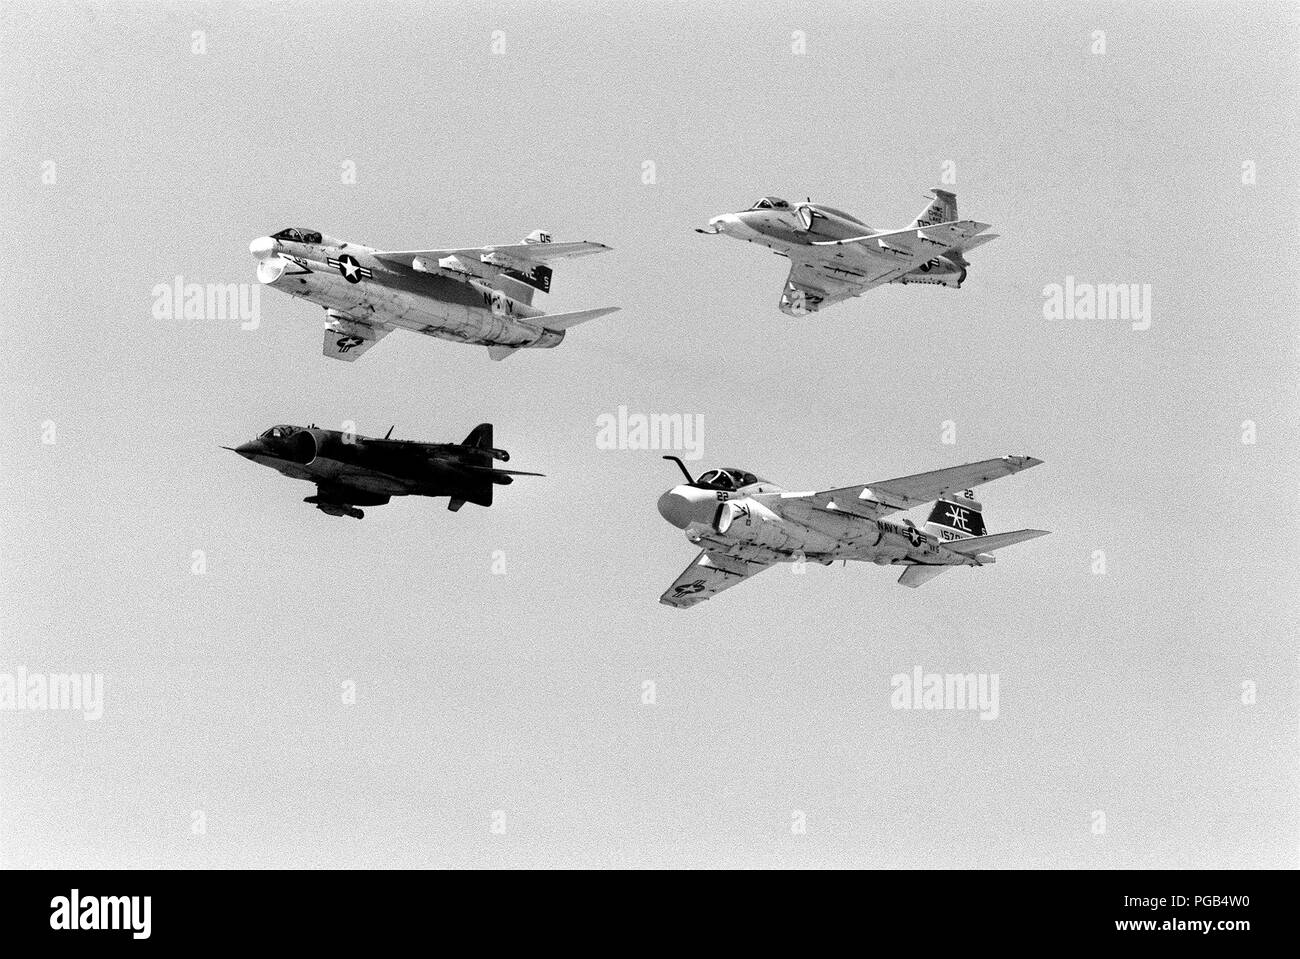 Ground-to-air view of four aircraft flying in formation during Test and Evaluation Squadron Five (VX-5) airshow.  The aircraft over Armitage Field, are (from left to right, clockwise) an A-7E Corsair II, an A-4M Skyhawk, and A-6E Intruder and an AV-8C Harrier. Stock Photo